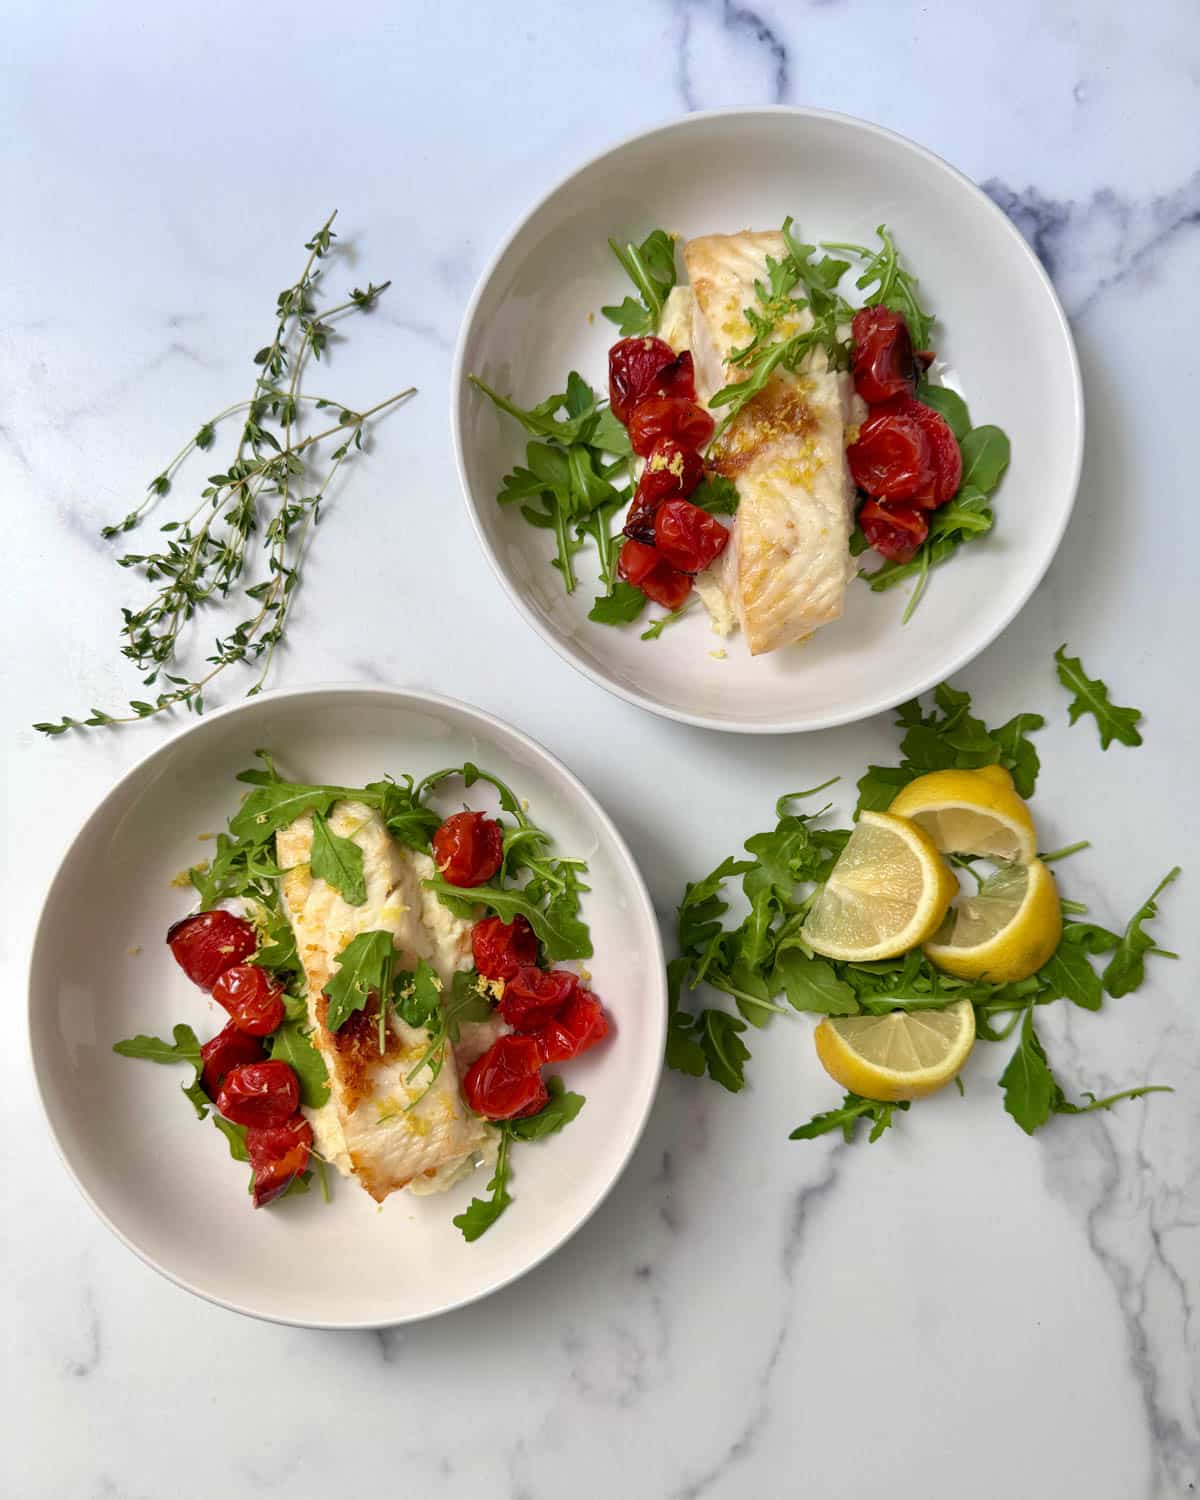 Seared fish served over mashed parsnips with roasted cherry tomatoes and arugula, served in a white bowl, with arugula and lemon wedges on the side.